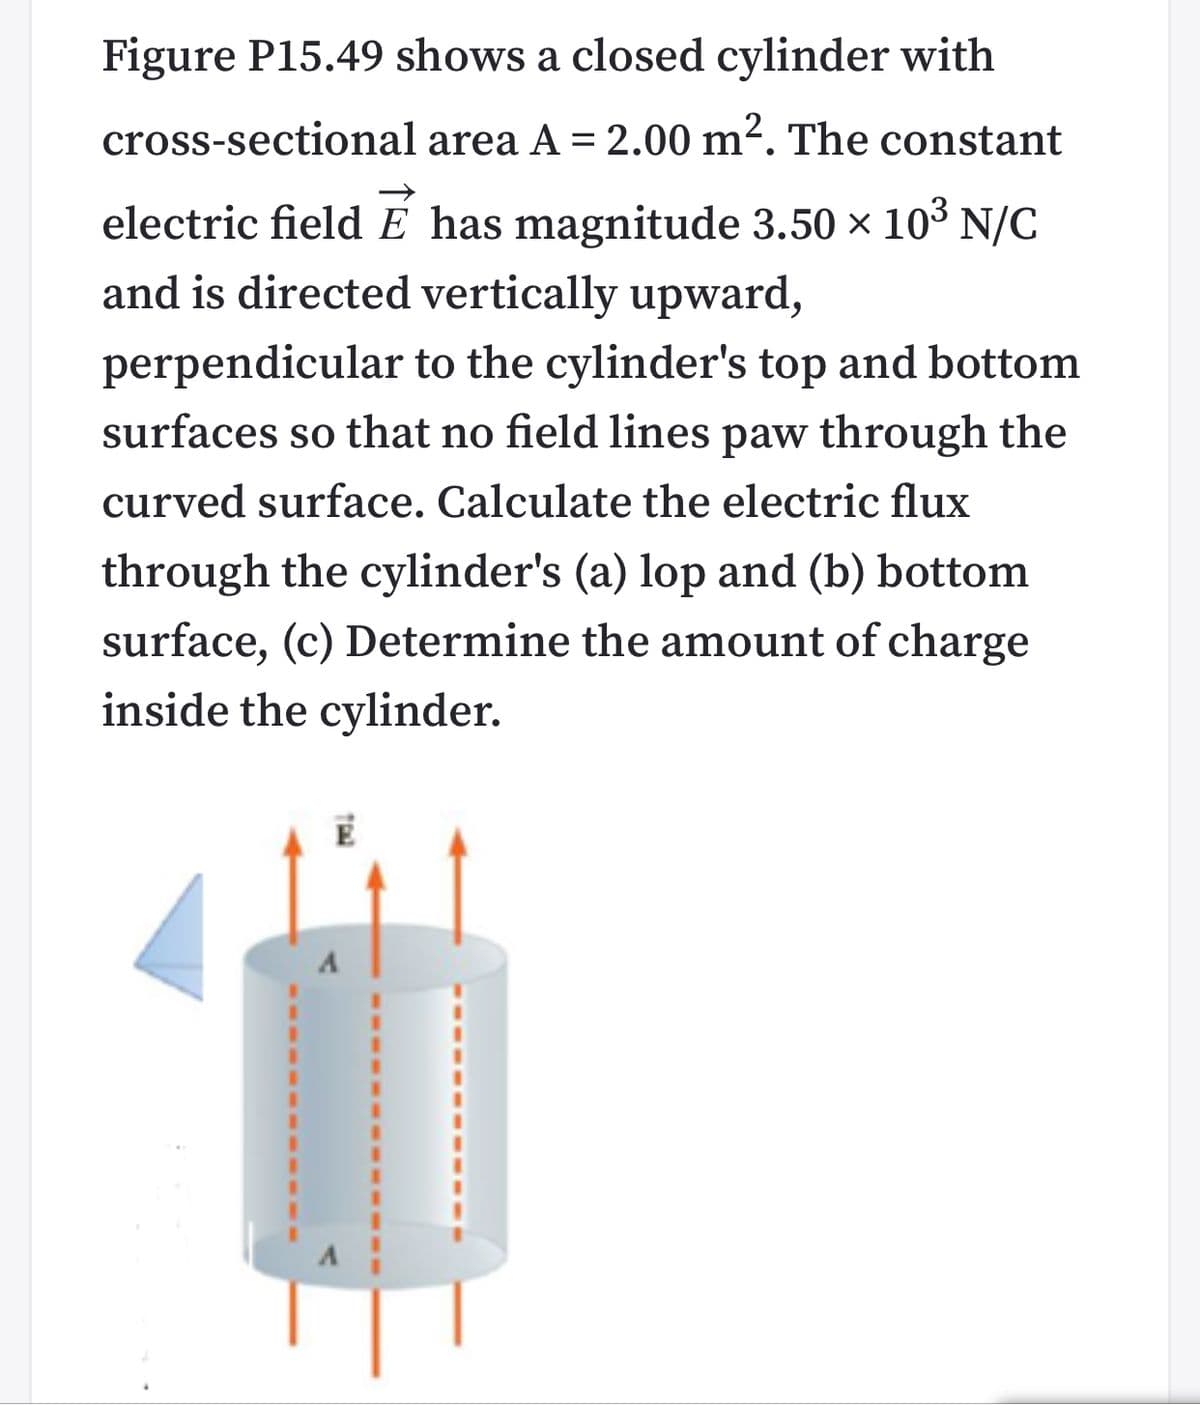 Figure P15.49 shows a closed cylinder with
cross-sectional area A = 2.00 m². The constant
electric field E has magnitude 3.50 x 10° N/C
and is directed vertically upward,
perpendicular to the cylinder's top and bottom
surfaces so that no field lines paw through the
curved surface. Calculate the electric flux
through the cylinder's (a) lop and (b) bottom
surface, (c) Determine the amount of charge
inside the cylinder.
A
